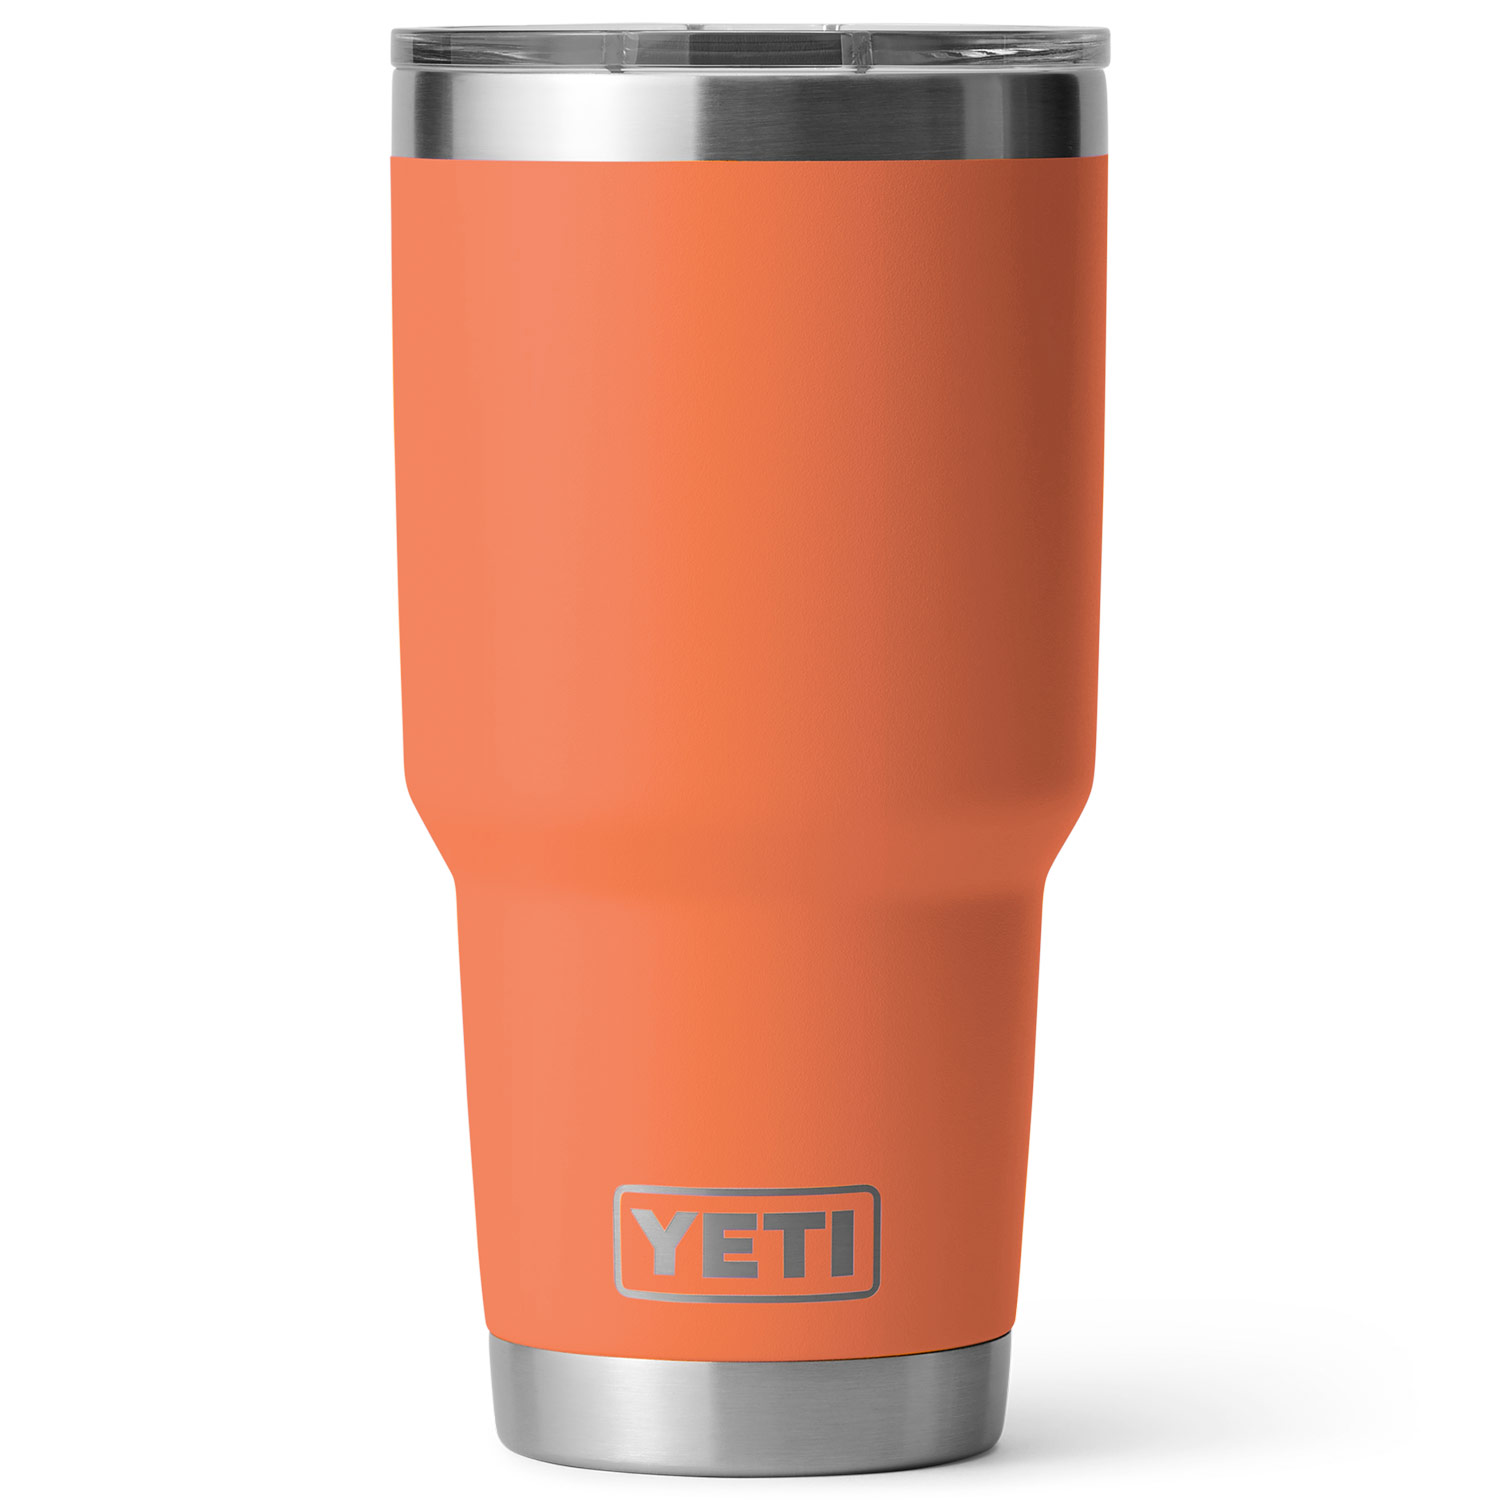 Yeti Rambler 30 Oz. Seafoam Stainless Steel Insulated Tumbler with  MagSlider Lid - Groom & Sons' Hardware